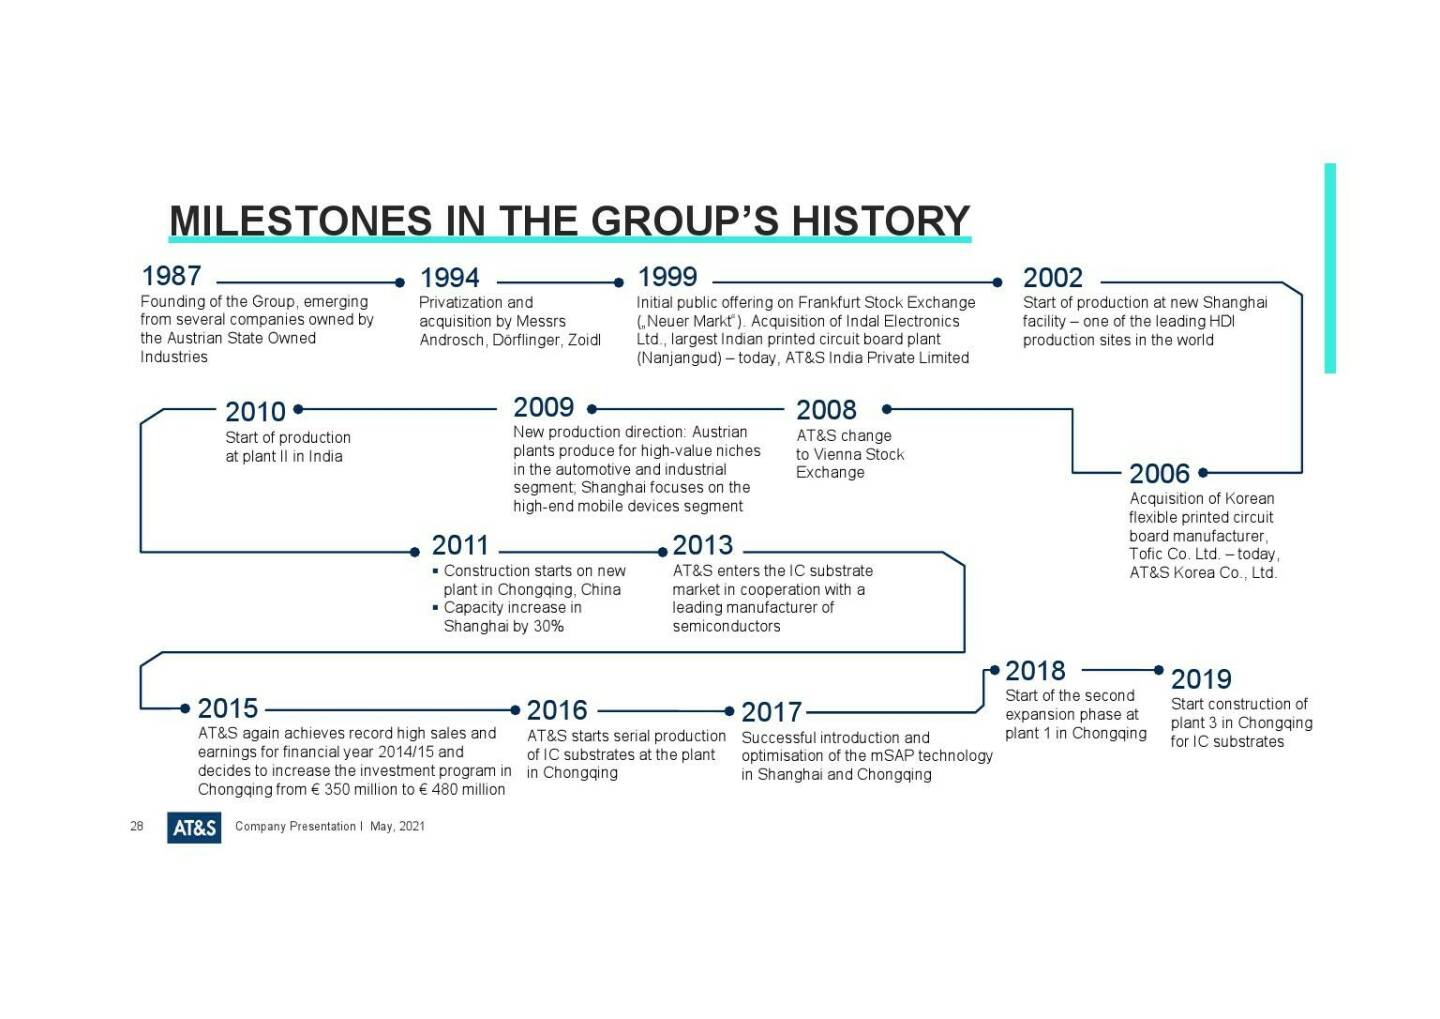 AT&S - Milestones in the group's history